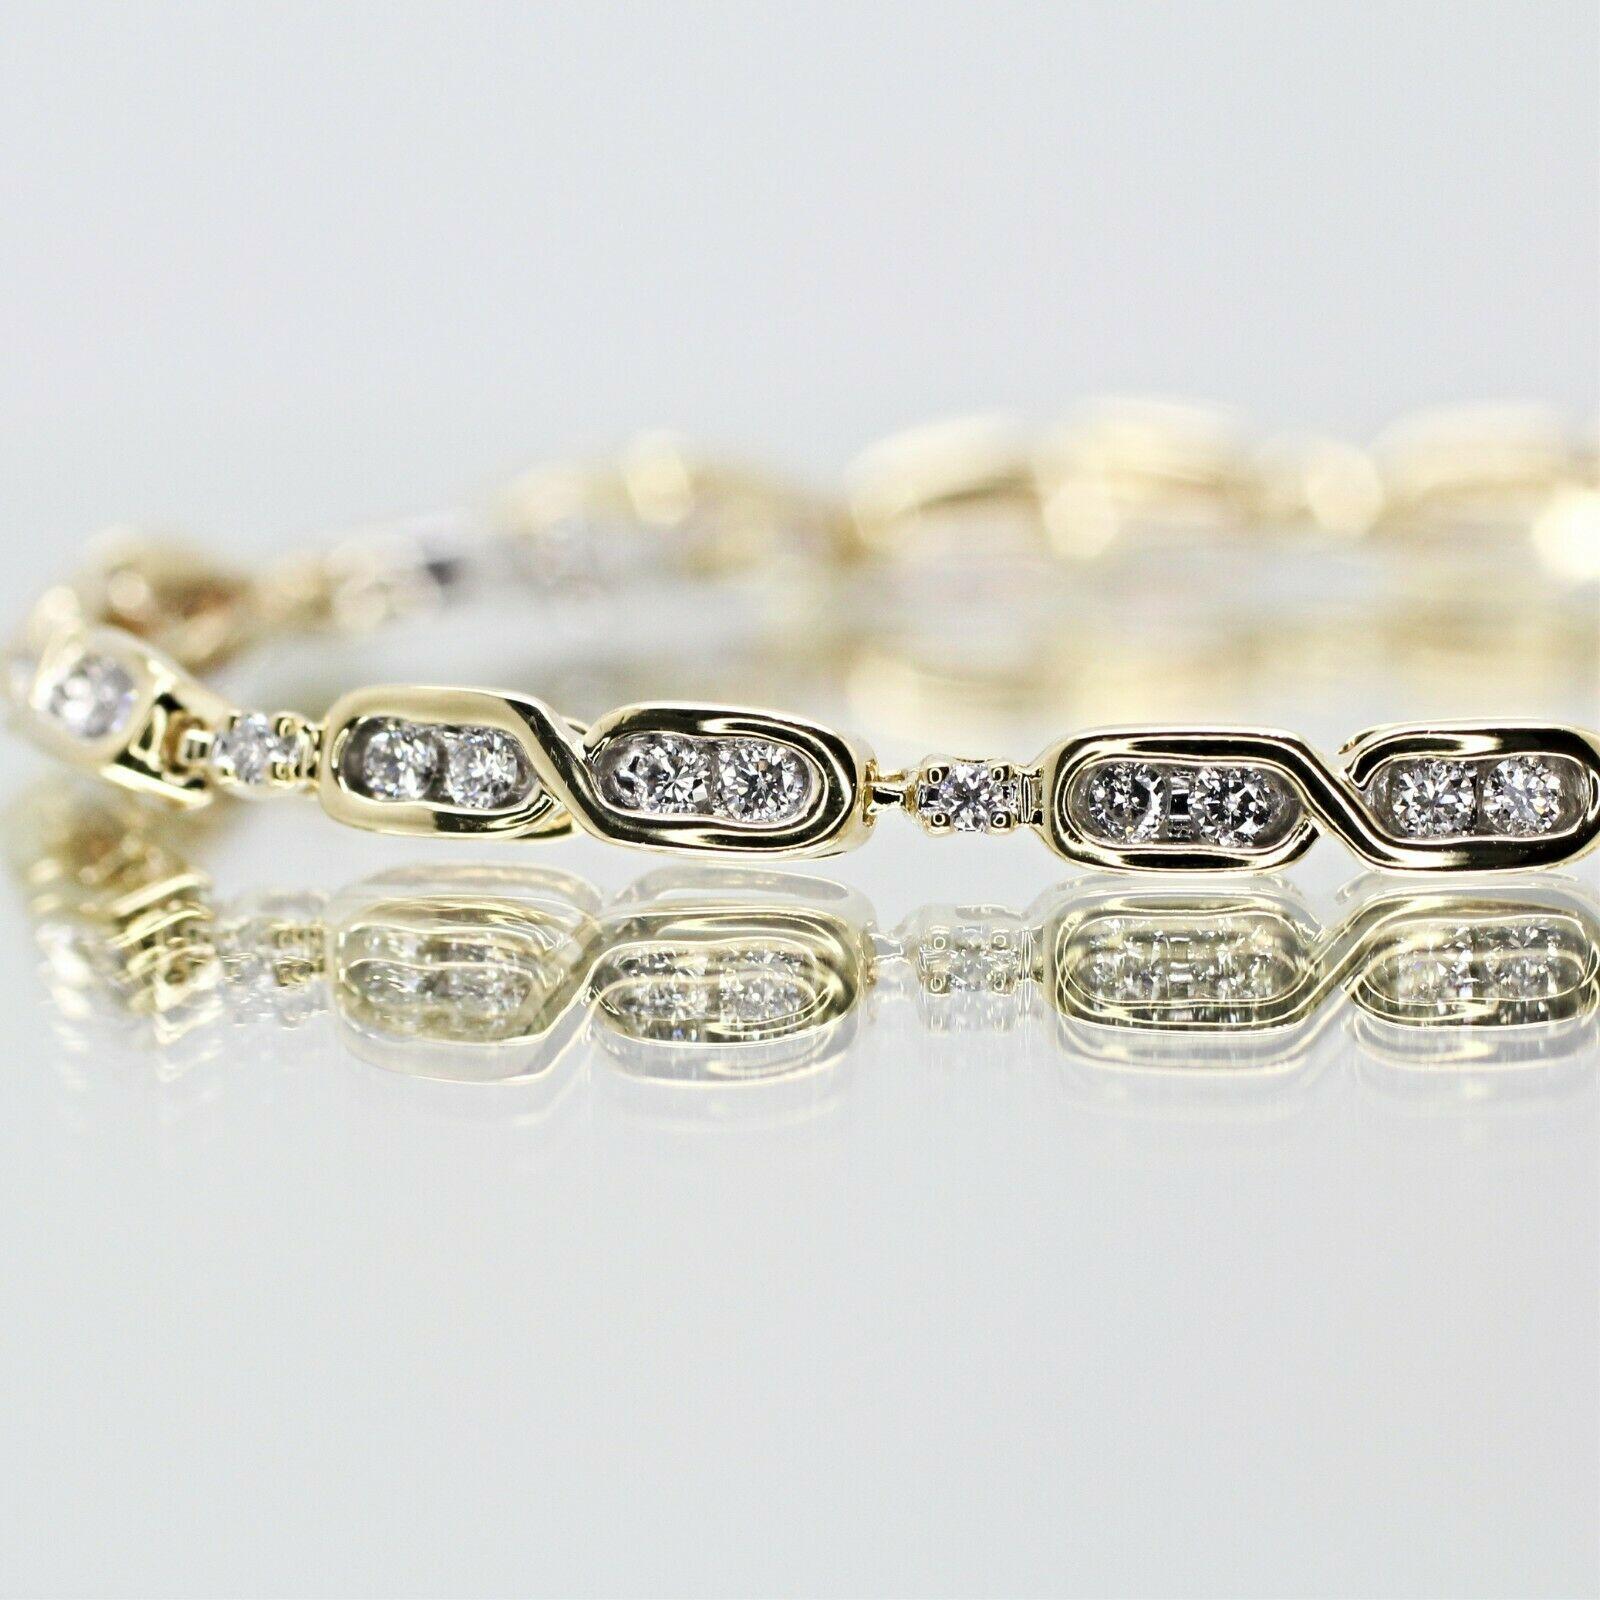   This is very beautiful 14K yellow gold station tennis bracelet with 67 pieces round cut diamonds in approximately 1.15 carat total weight, H color and SI2 in clarity.
Specifications:
    main stone: ROUND CUT DIAMONDS
    diamonds: 67 PCS
   